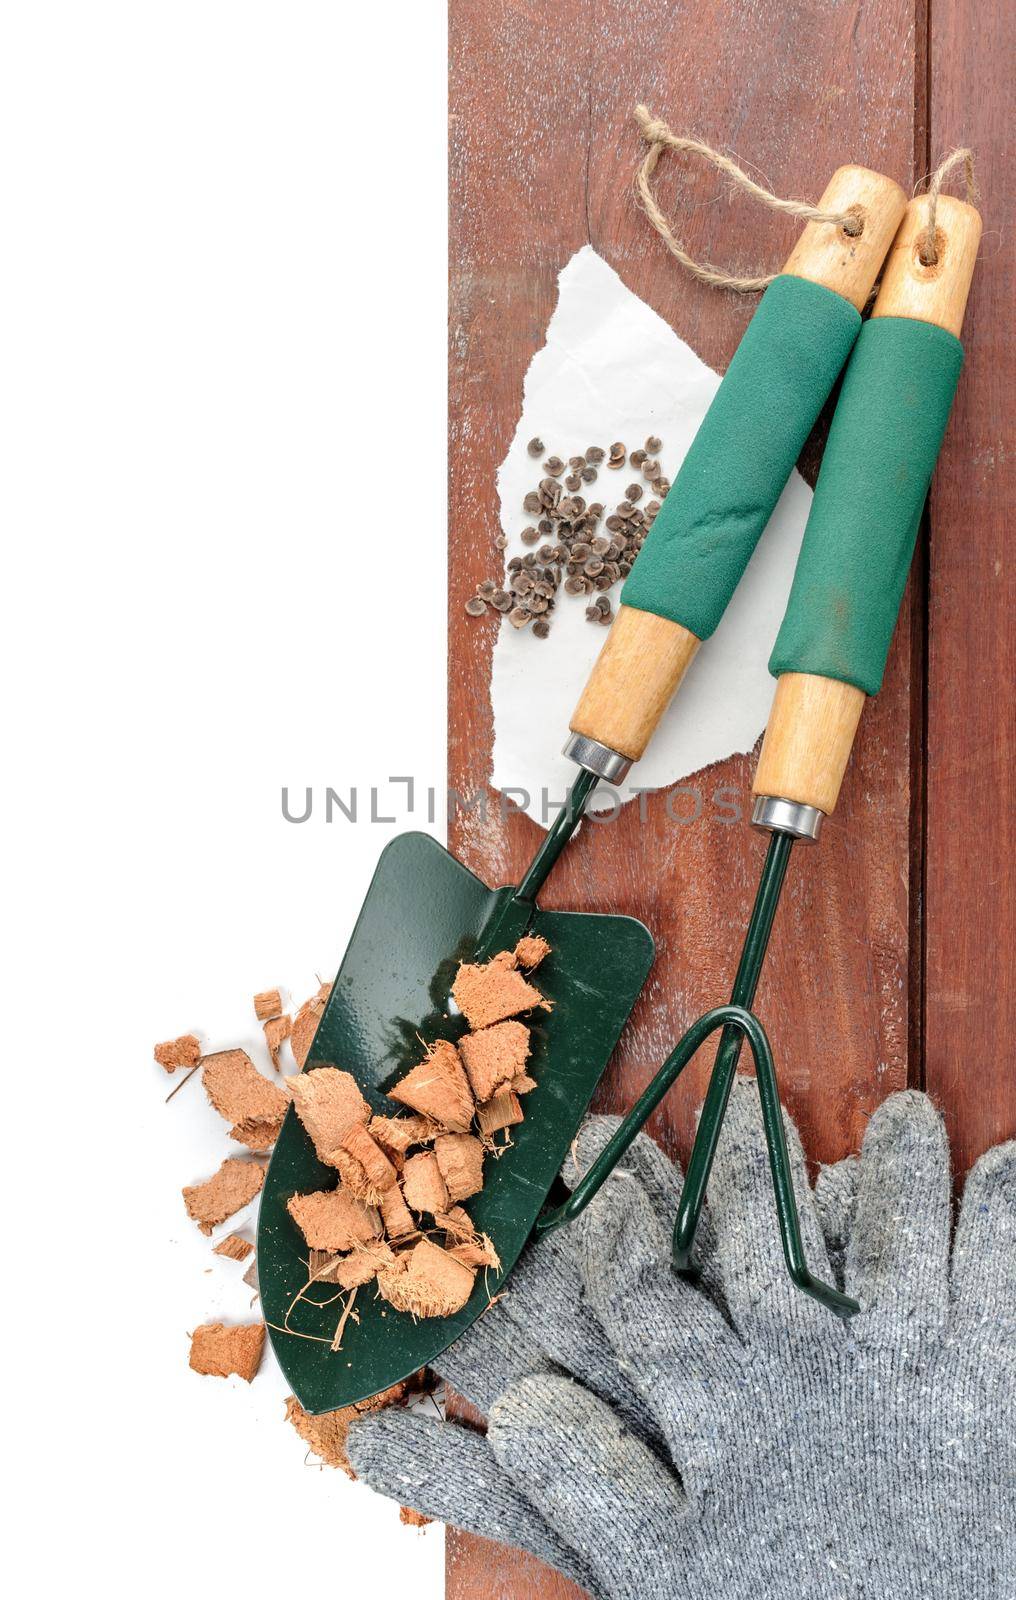 gardening tools on wooden plank background